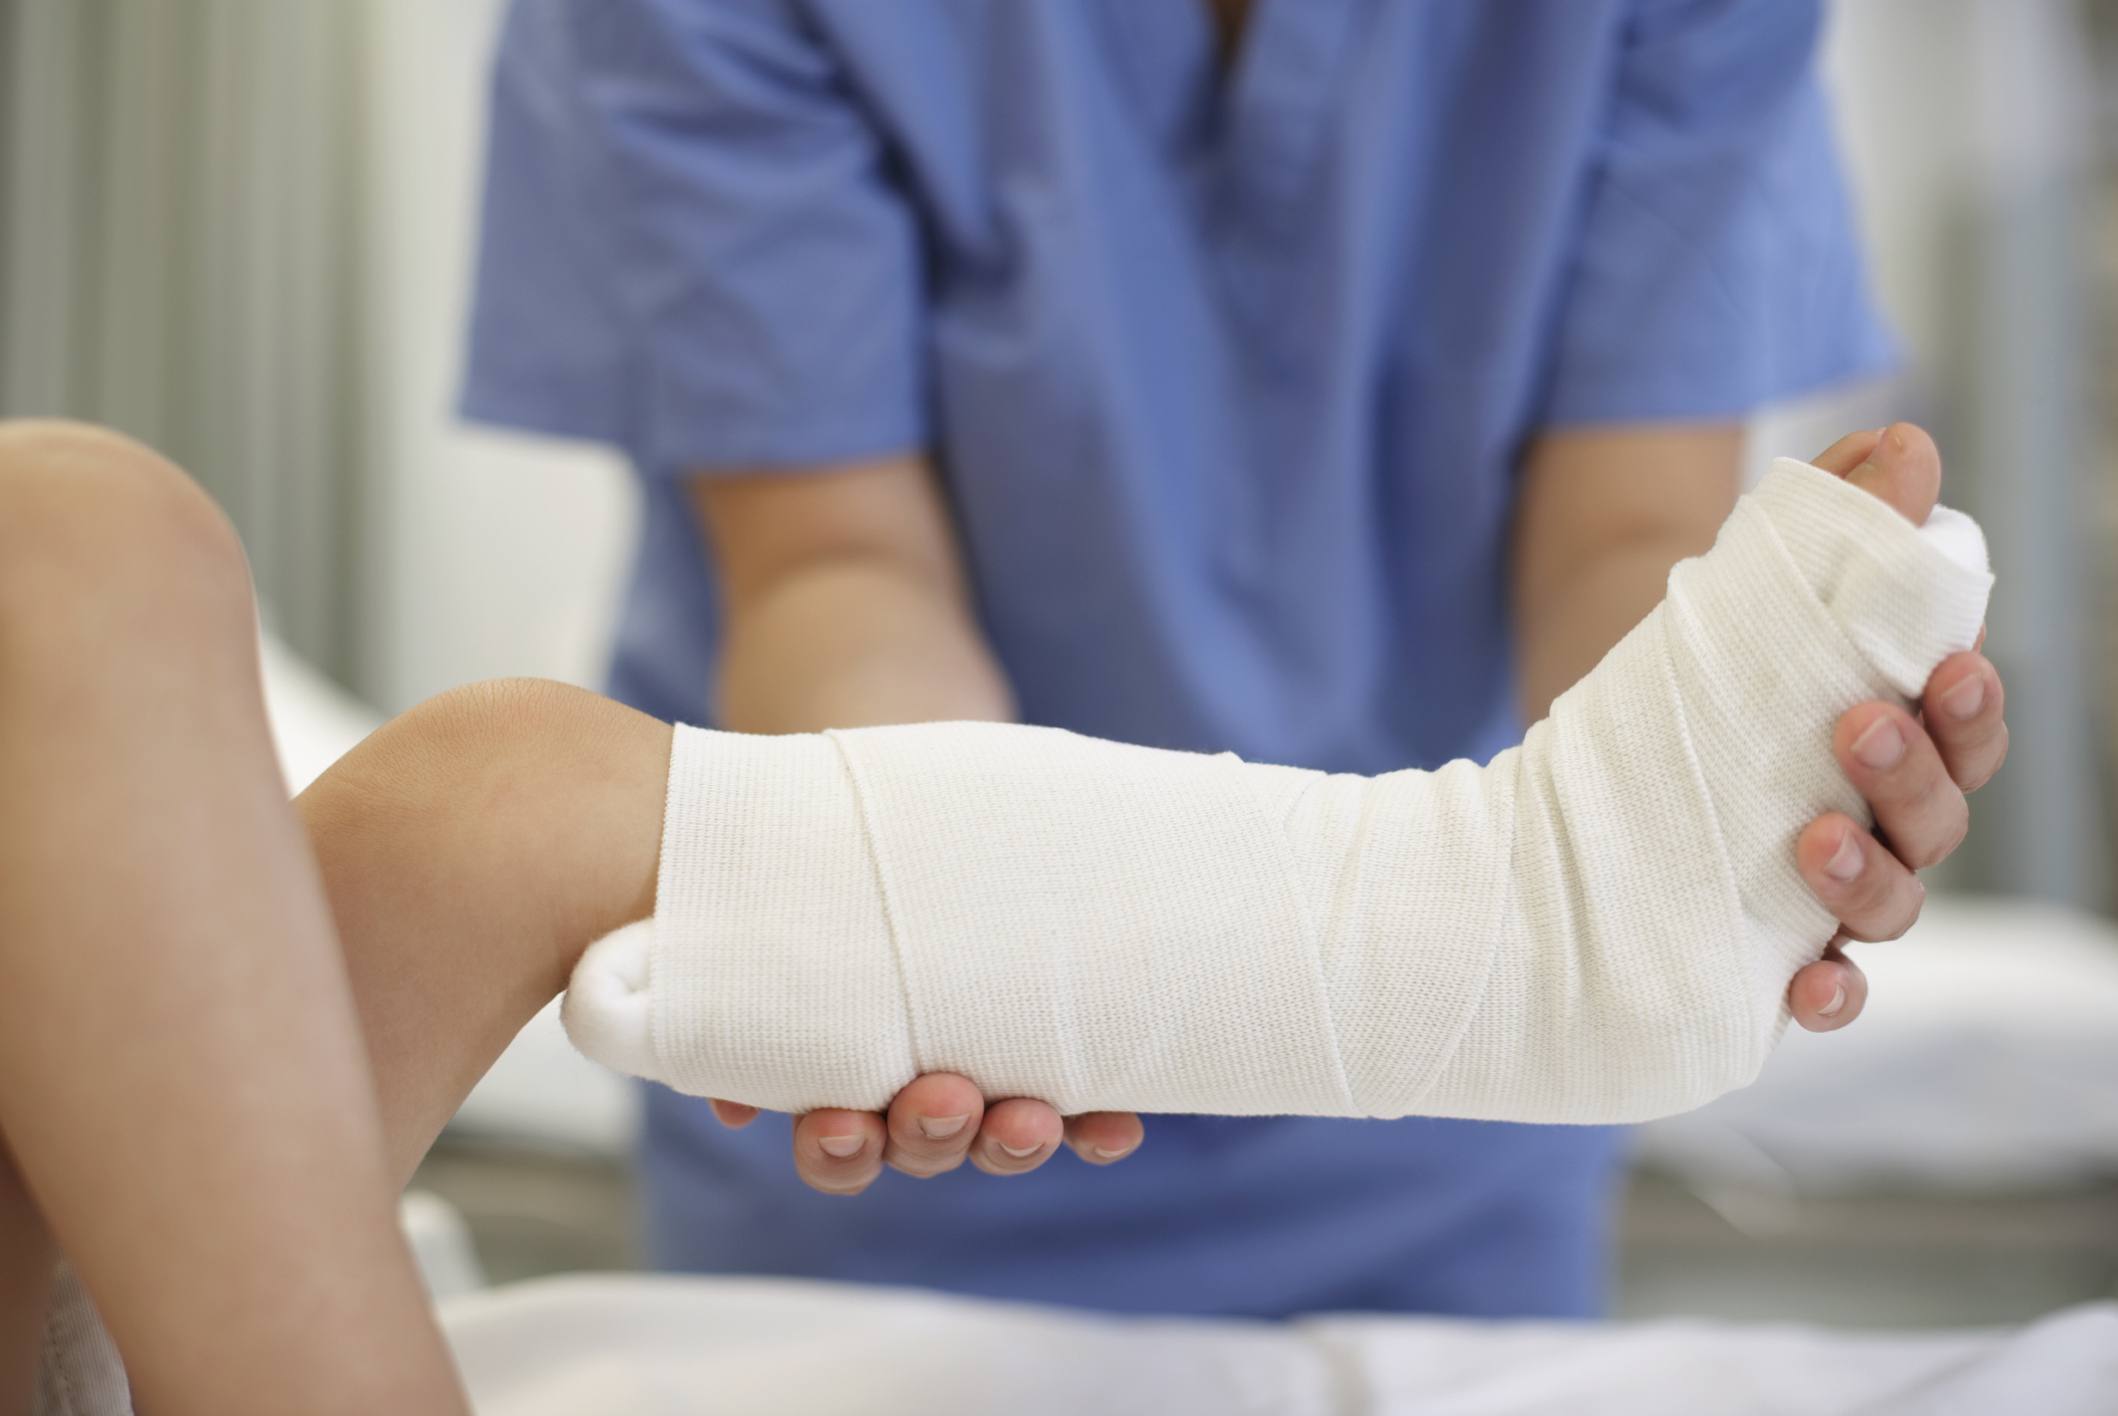 7 Common Conditions That Require Urgent Care